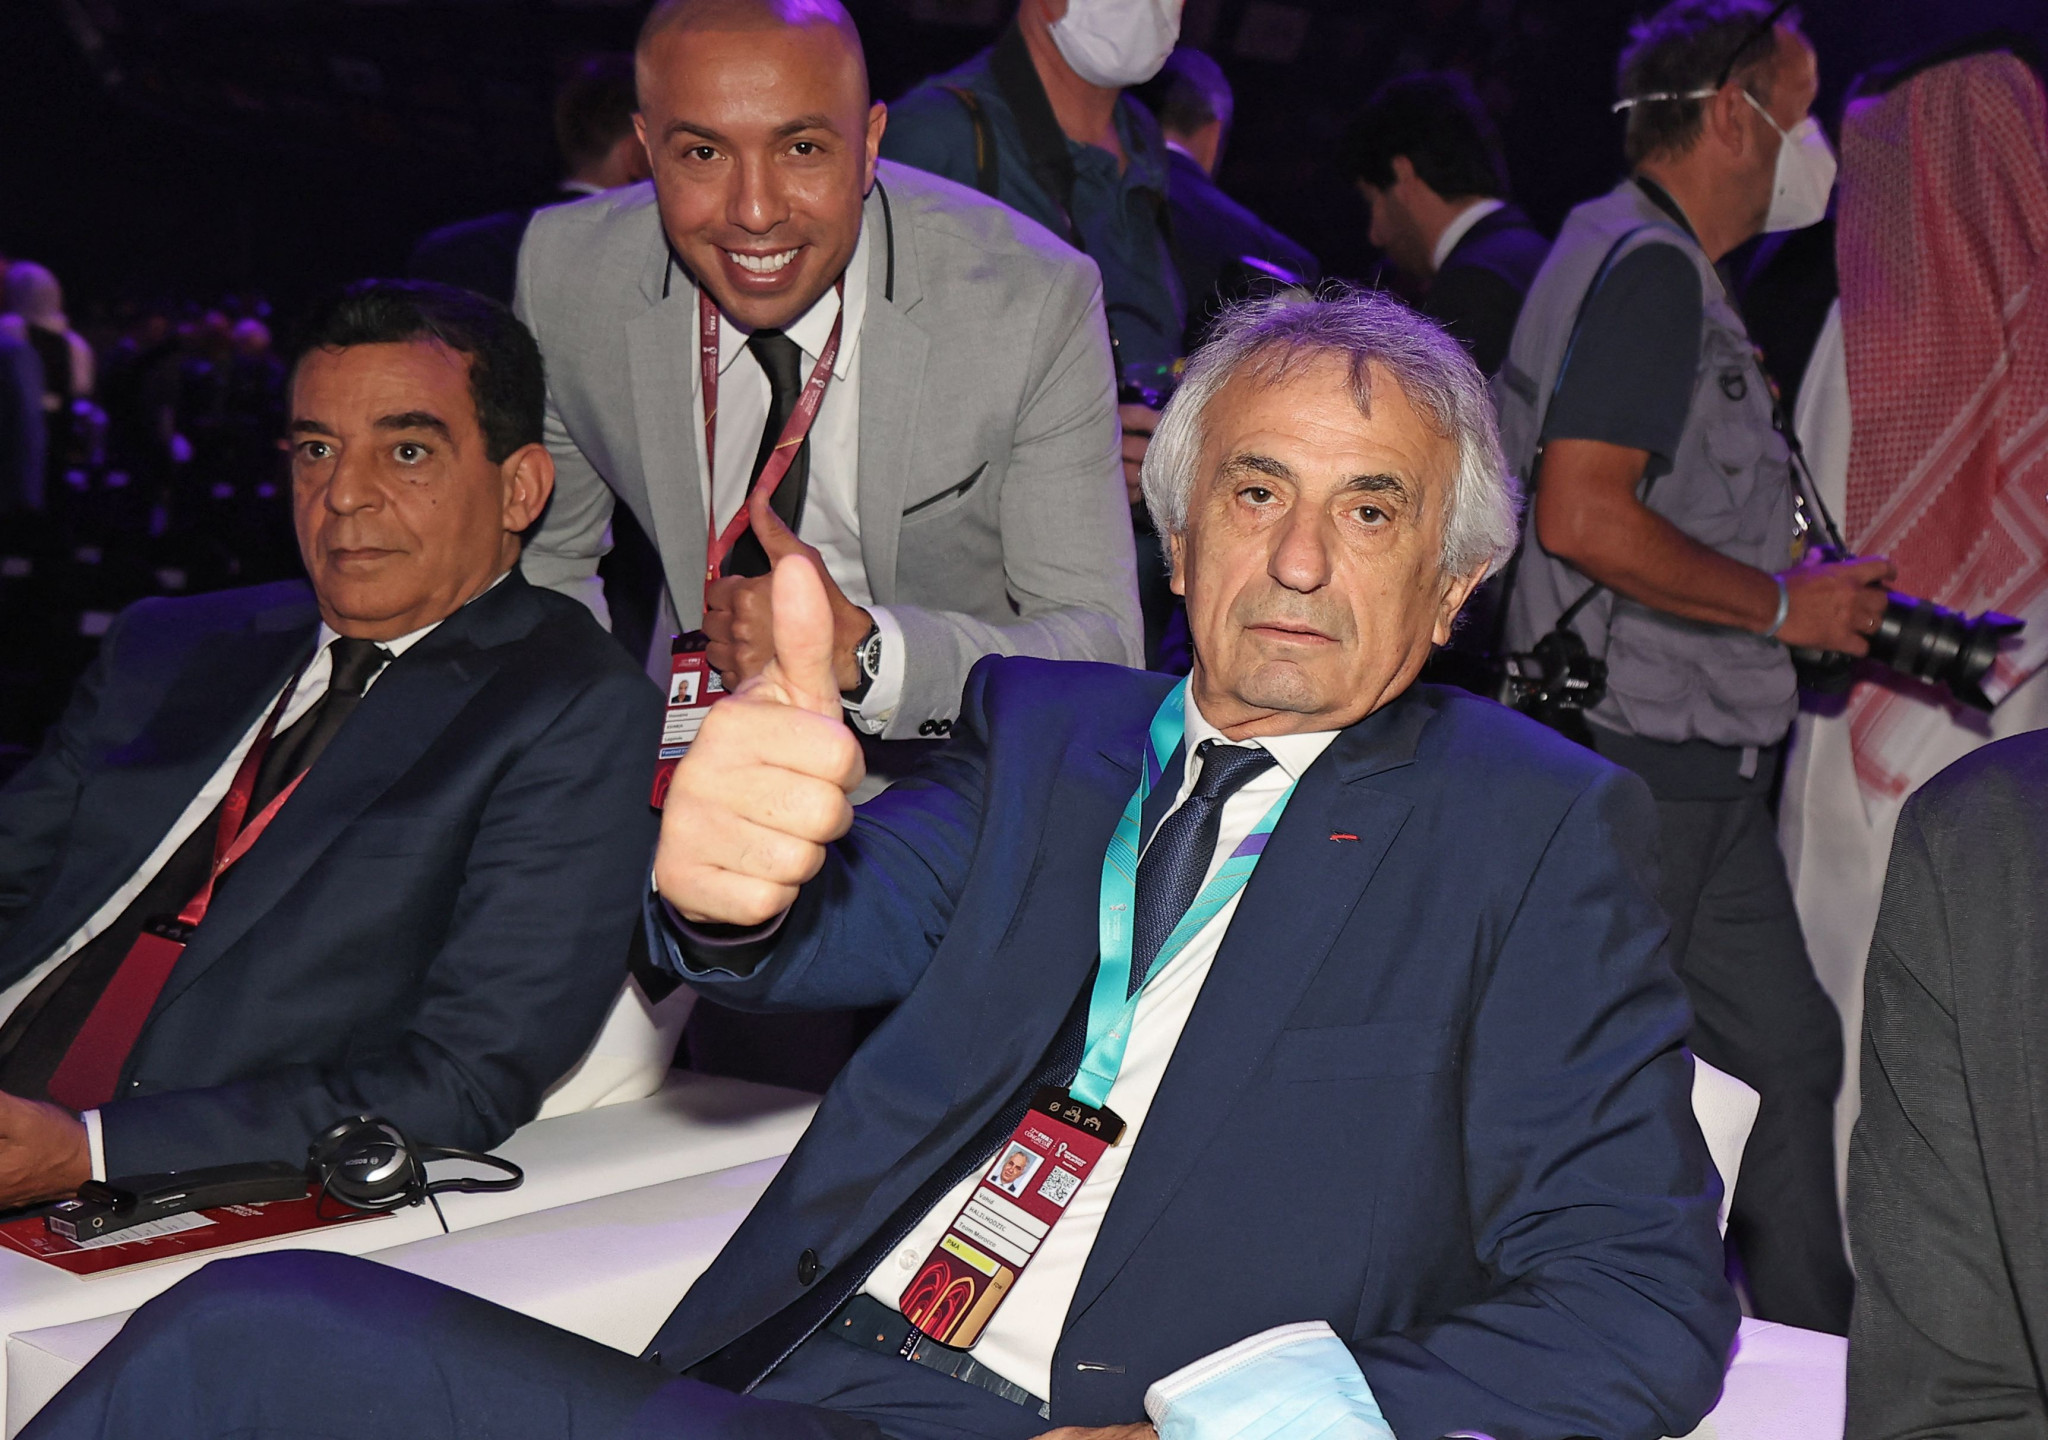 Vahid Halilhodžić was in Qatar earlier this year for the FIFA World Cup draw, but has now been sacked as Morocco head coach ©Getty Images